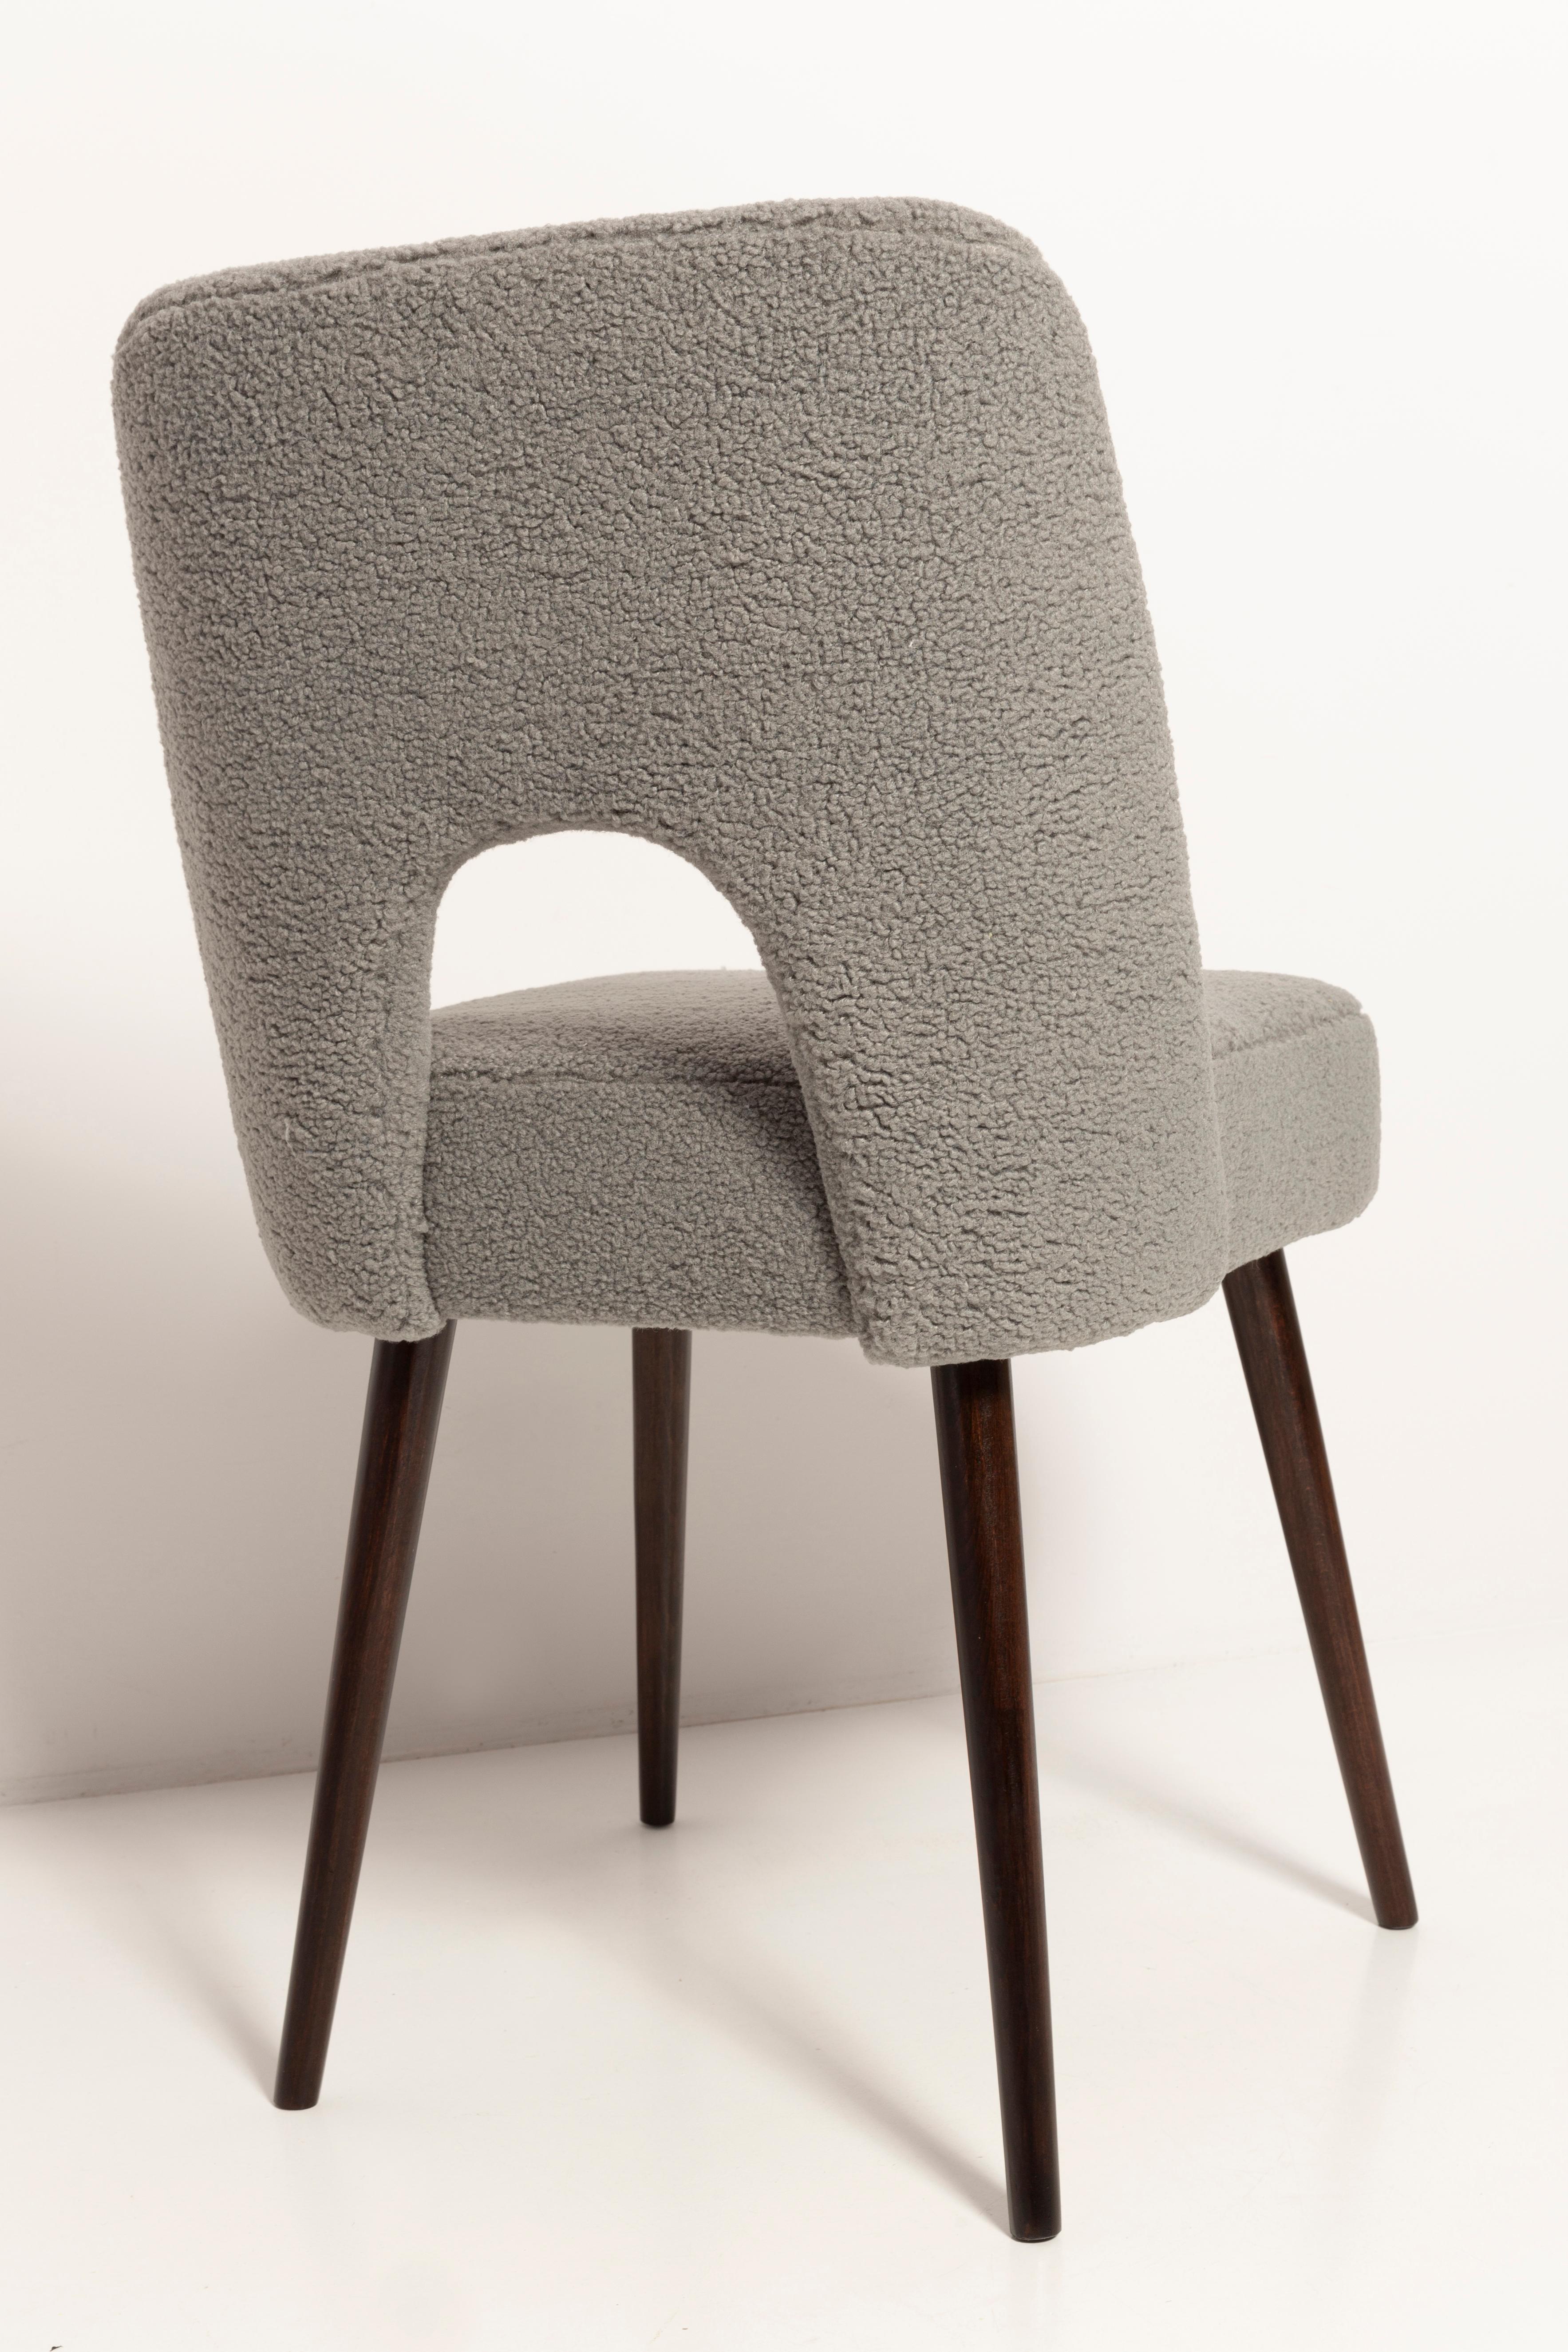 Gray Boucle 'Shell' Chair, Europe, 1960s For Sale 3